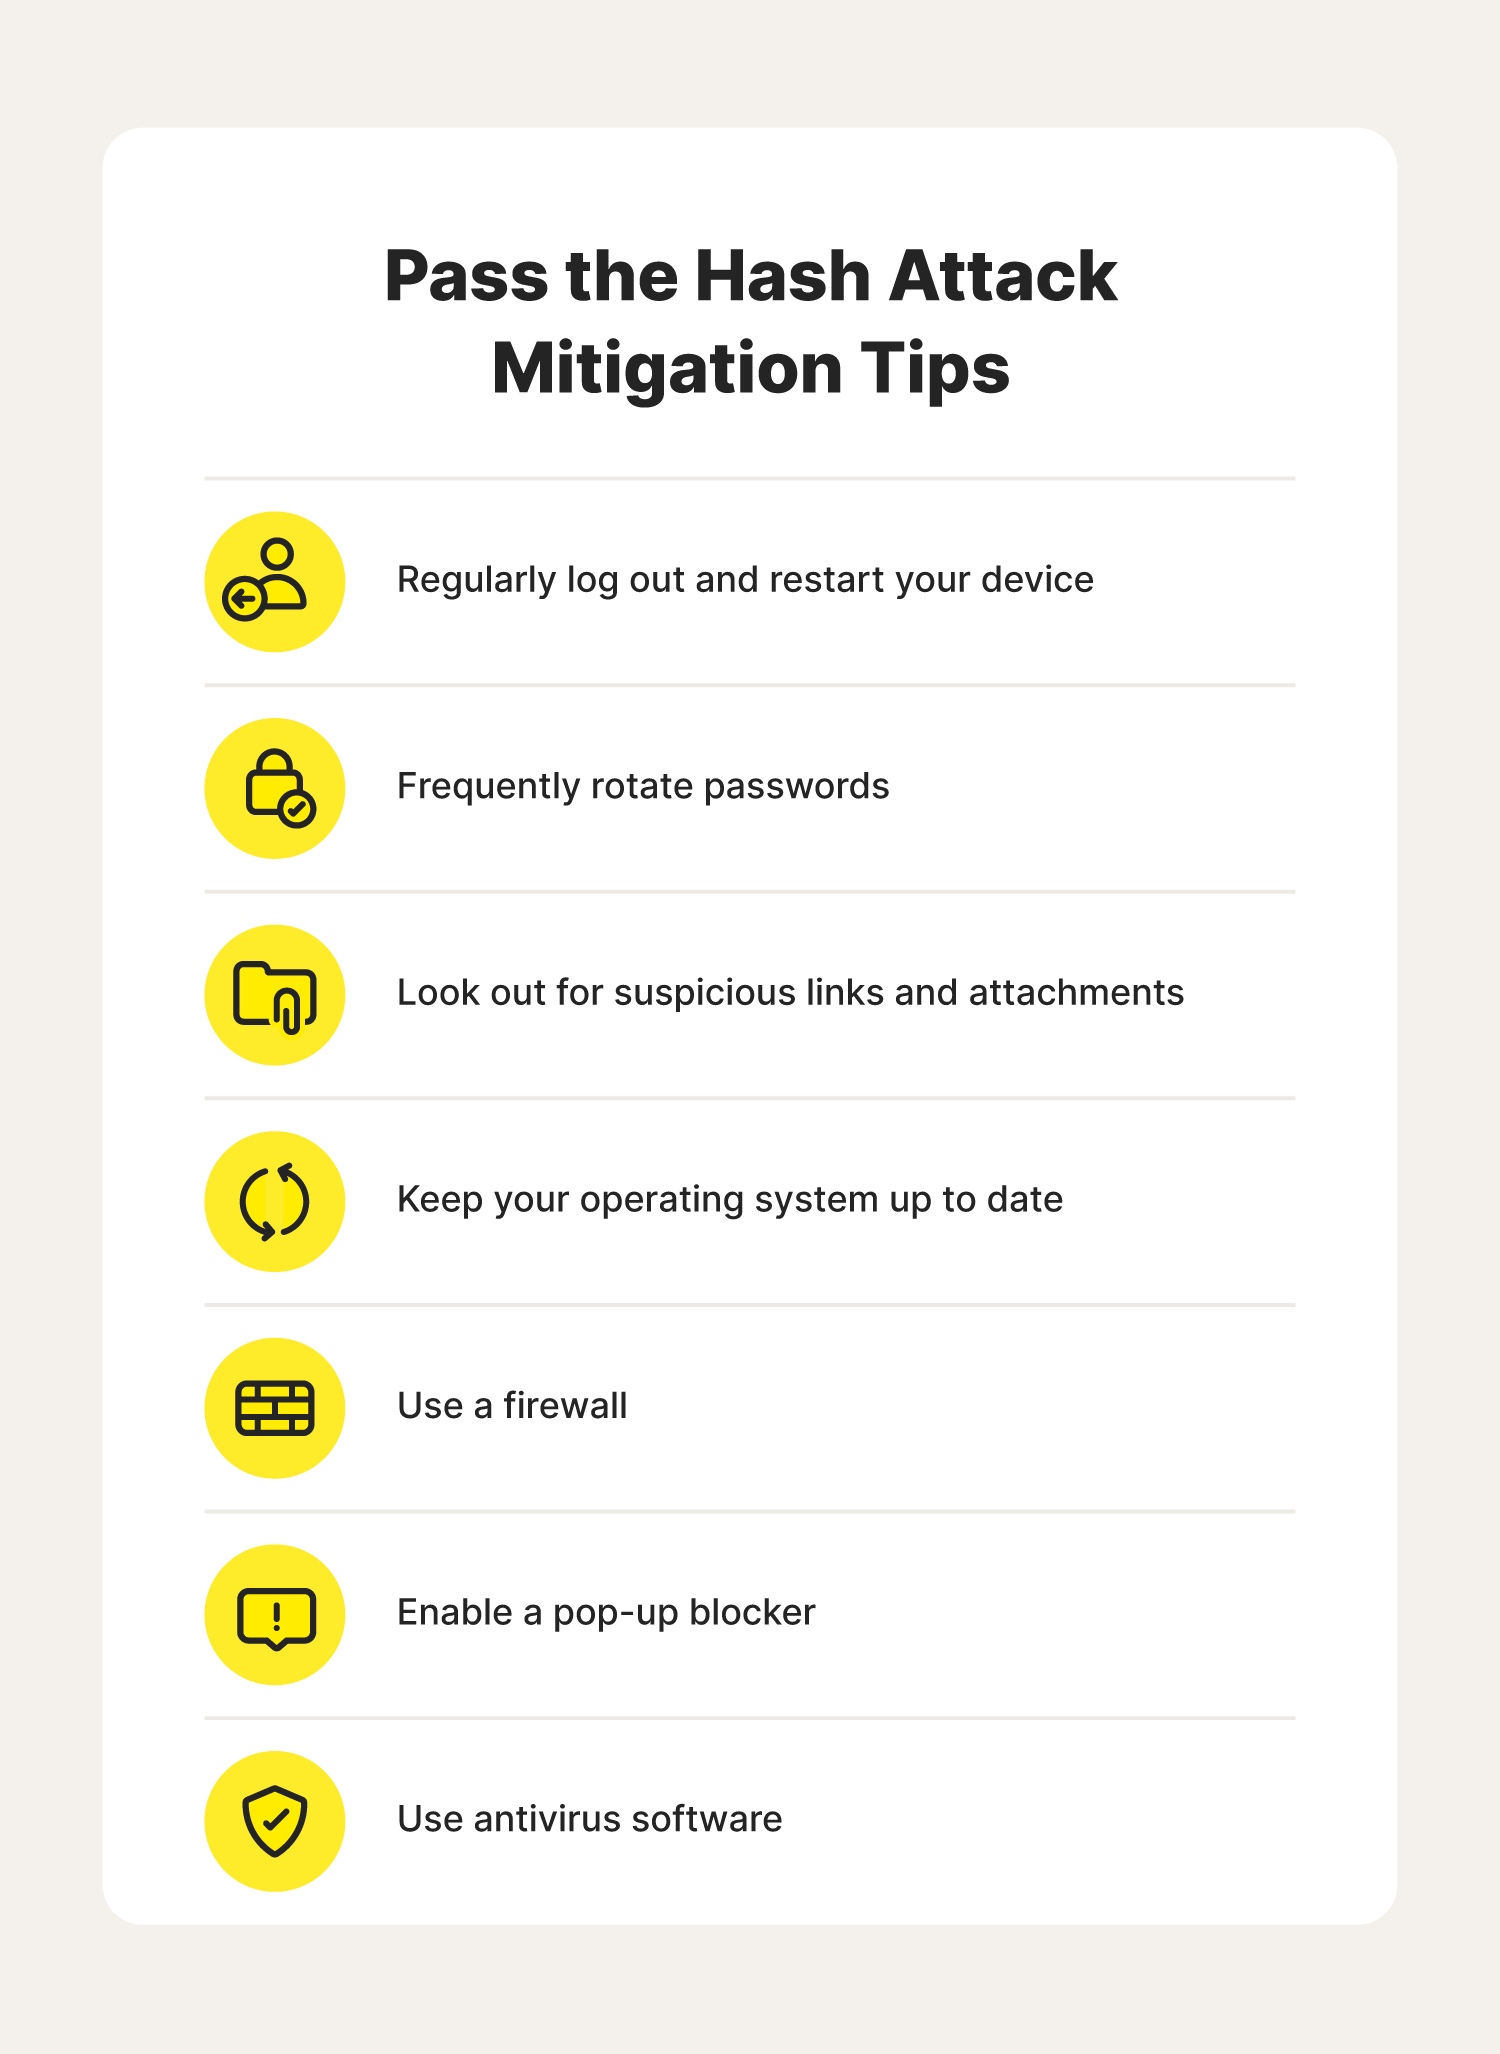 A graphic lists mitigation tips to help prevent a pass the hash attack.